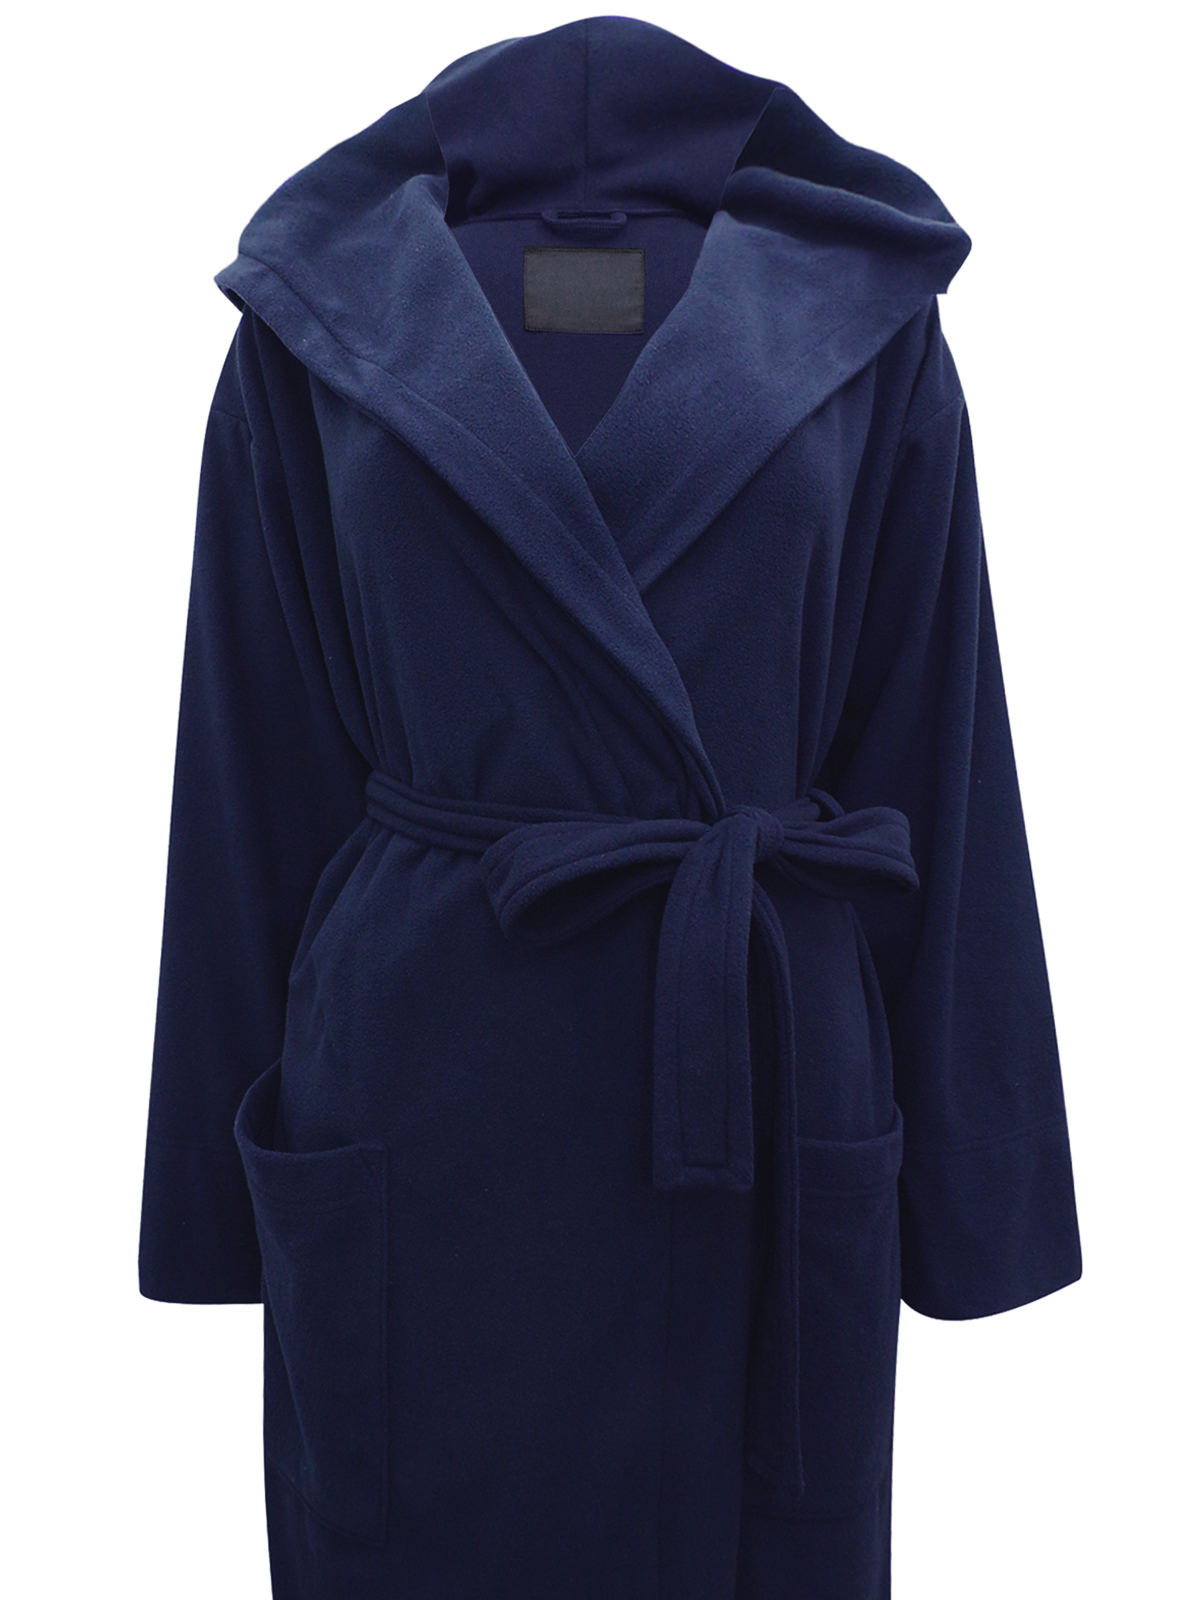 Marks and Spencer - - M&5 NAVY Hooded Fleece Wrap Dressing Gown - Size